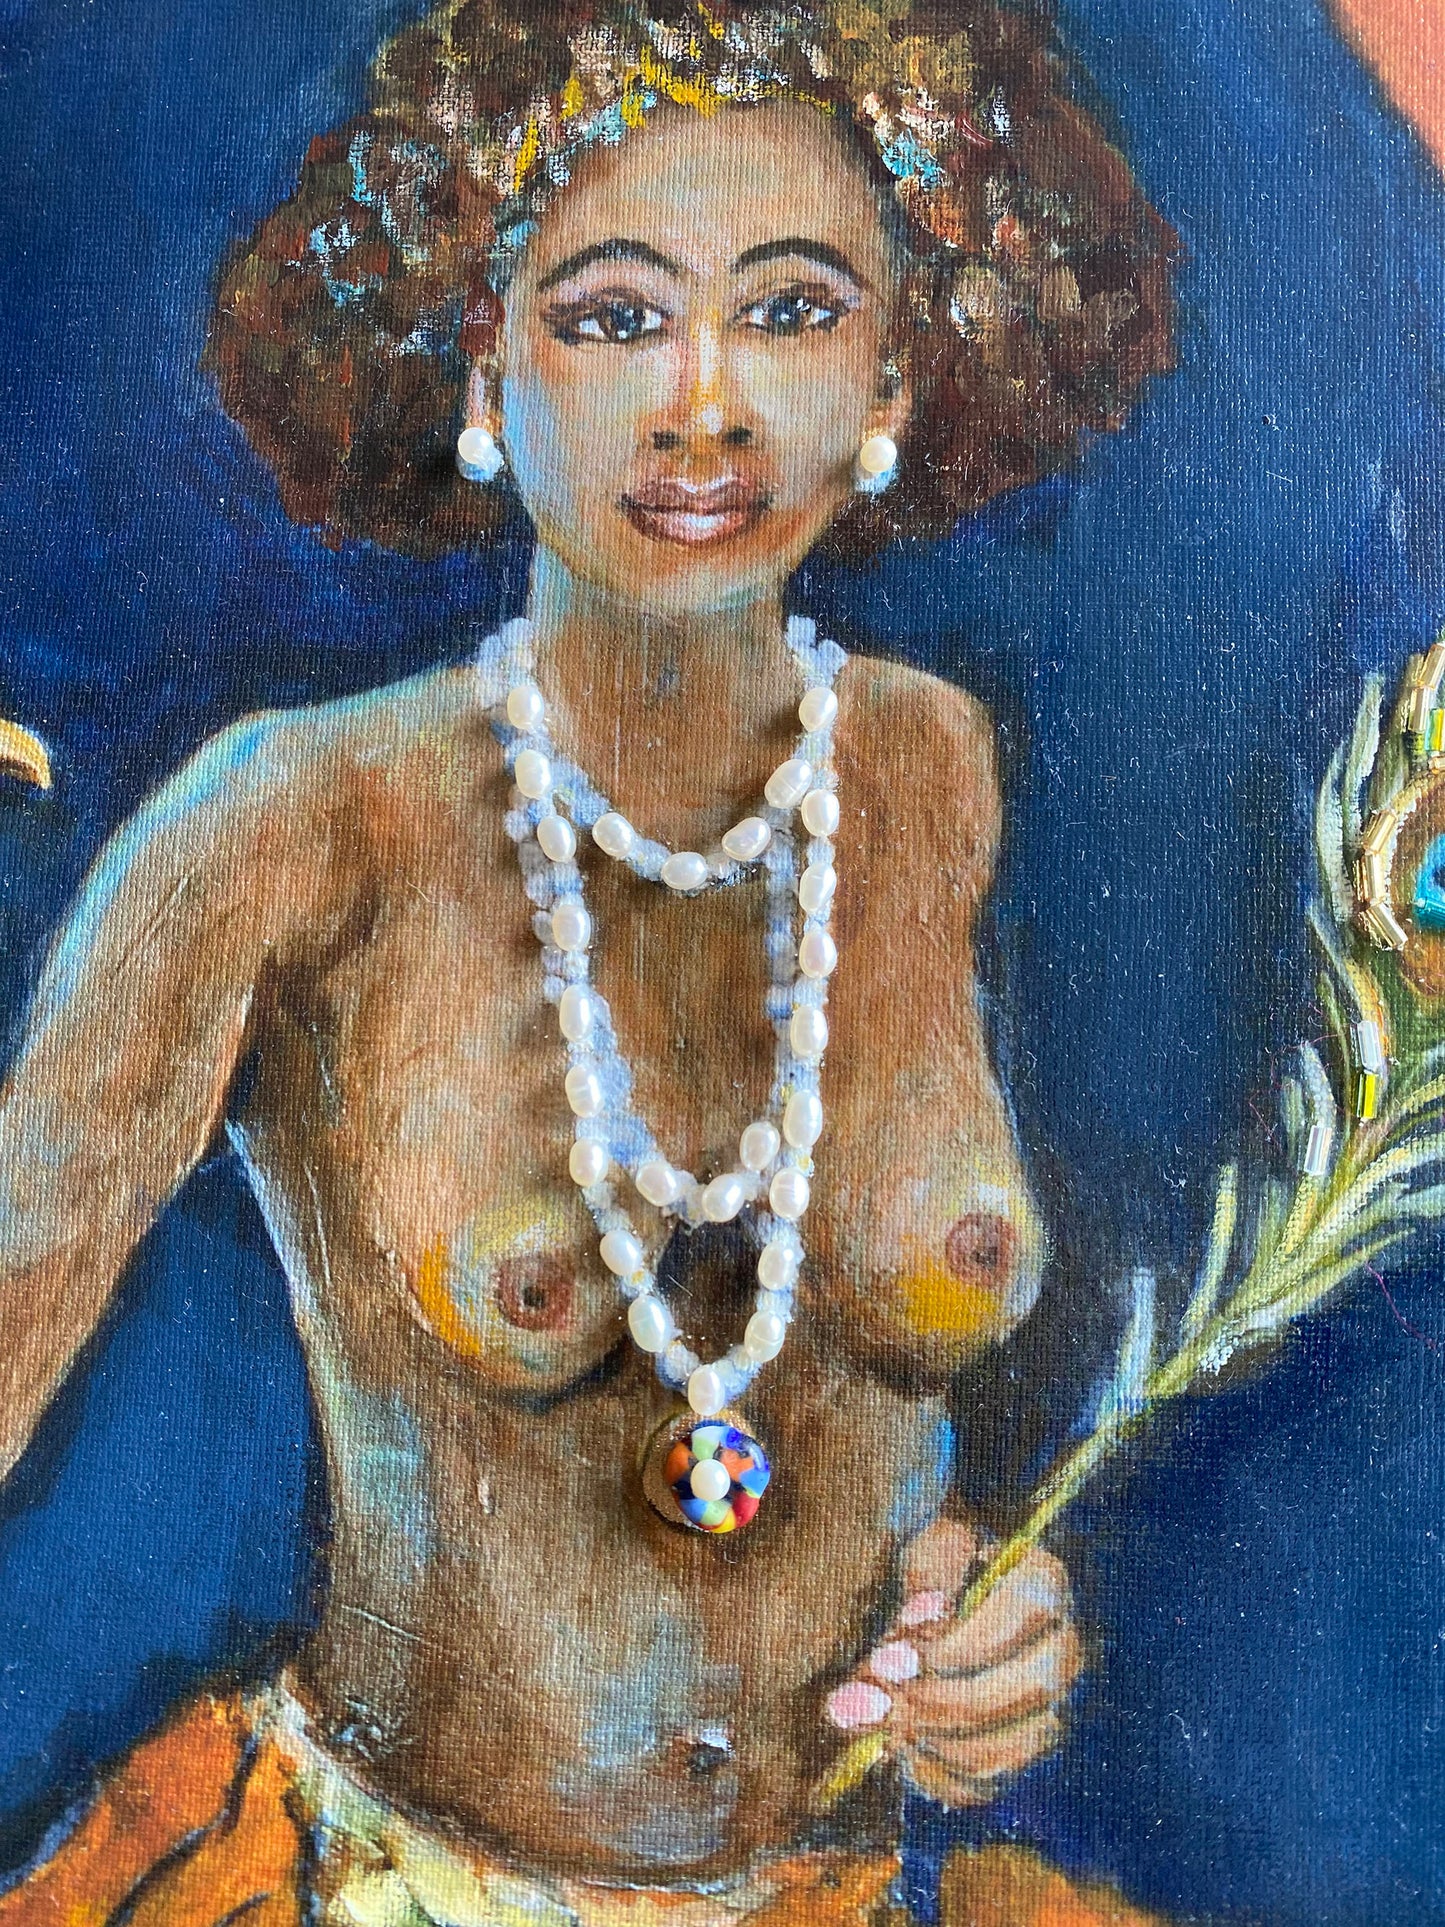 "Oshun" Embellished Giclee Print by Linda Queally